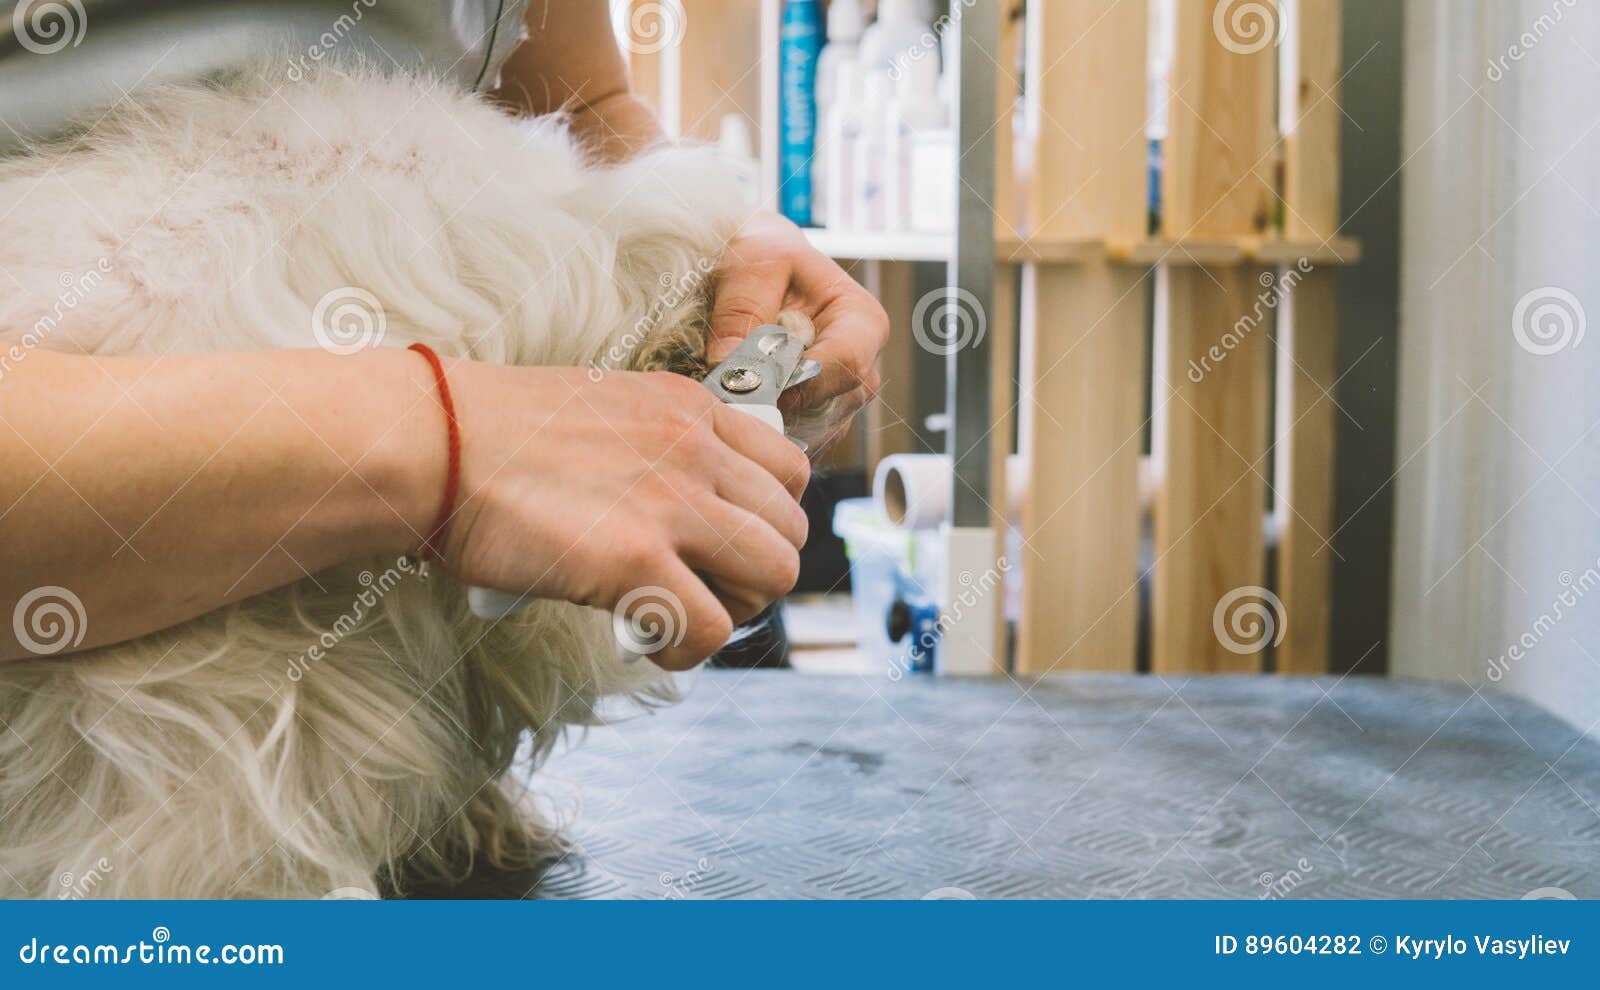 Nail Trimming in Dogs. Service Grooming Salon for Dogs. Nail Care Dogs